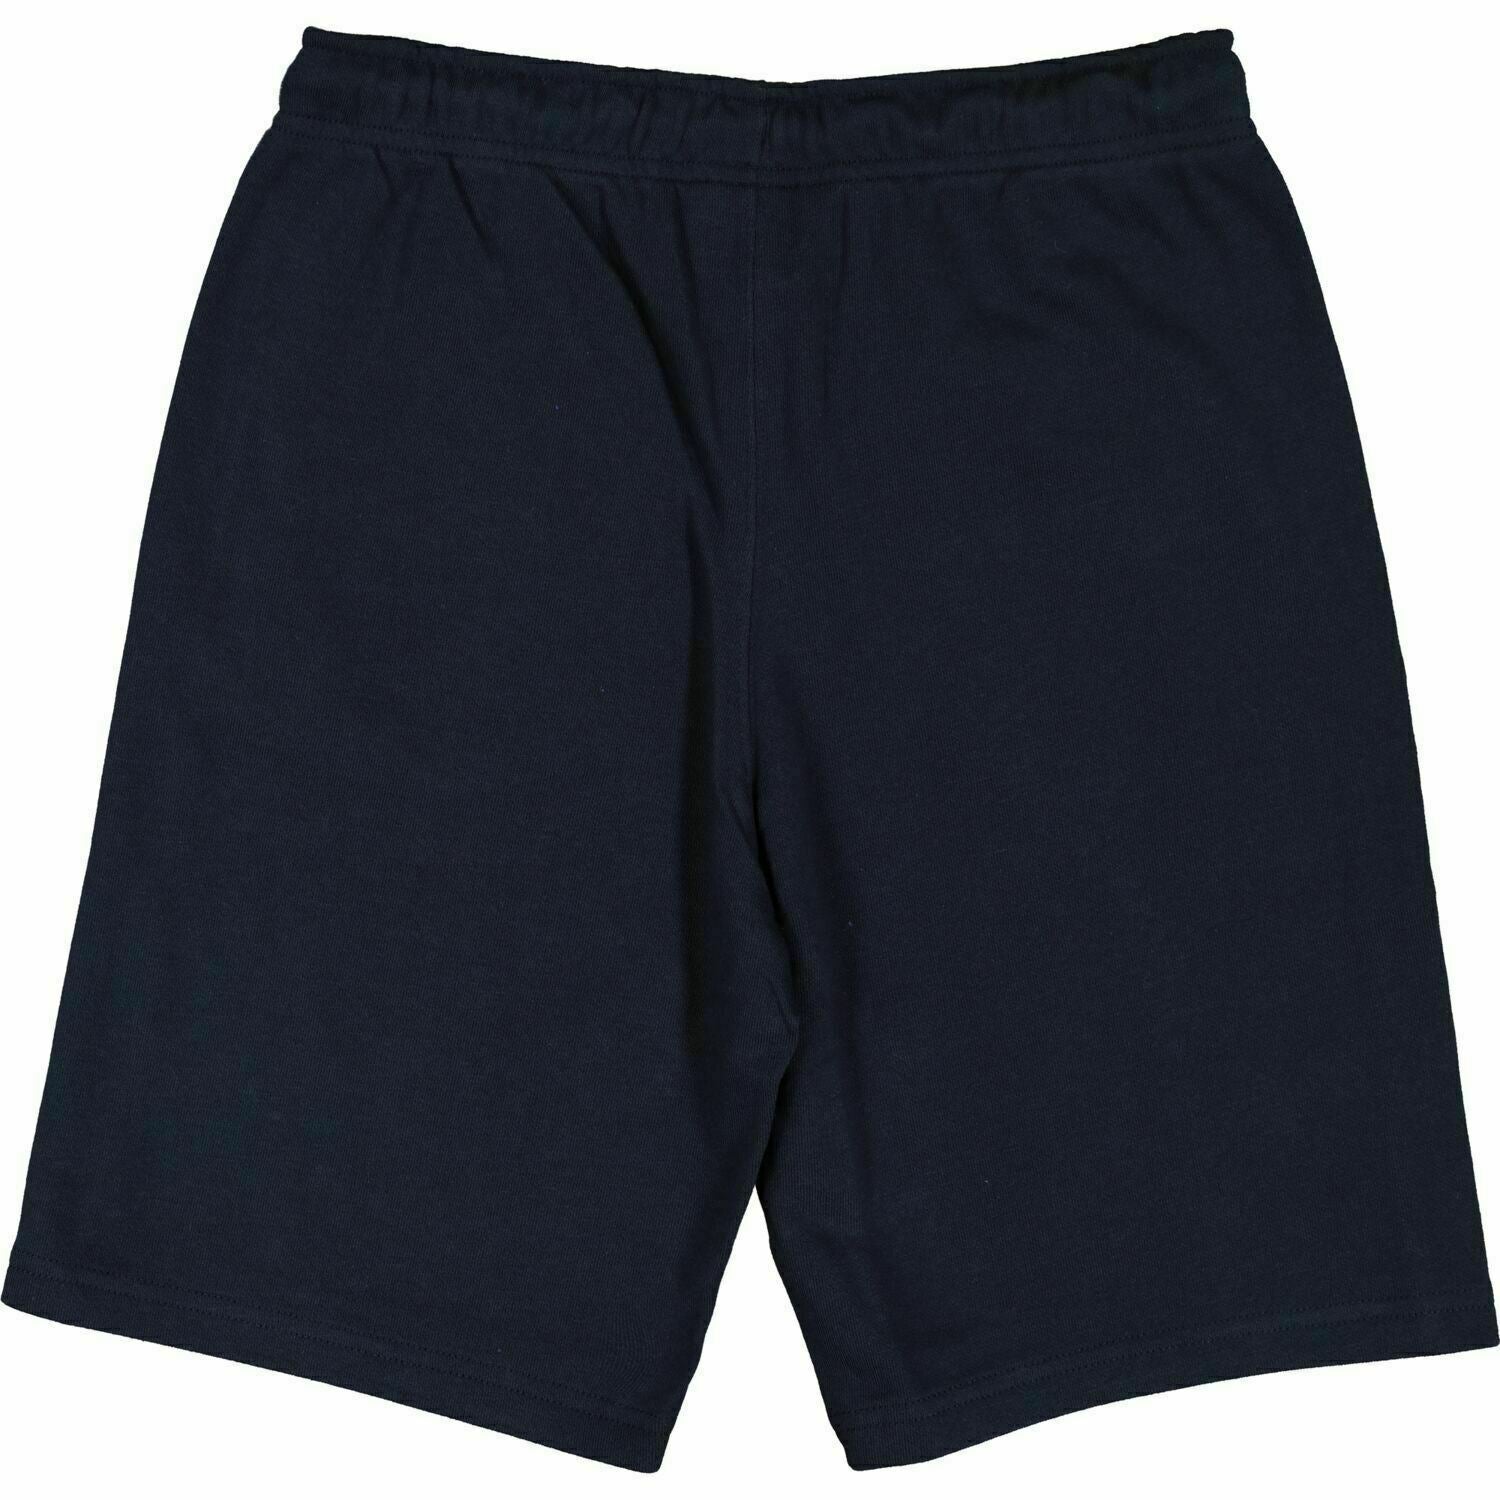 CHAMPION Boys' Sweat Shorts, Navy Blue / Side Tape, 5 years to 6 years